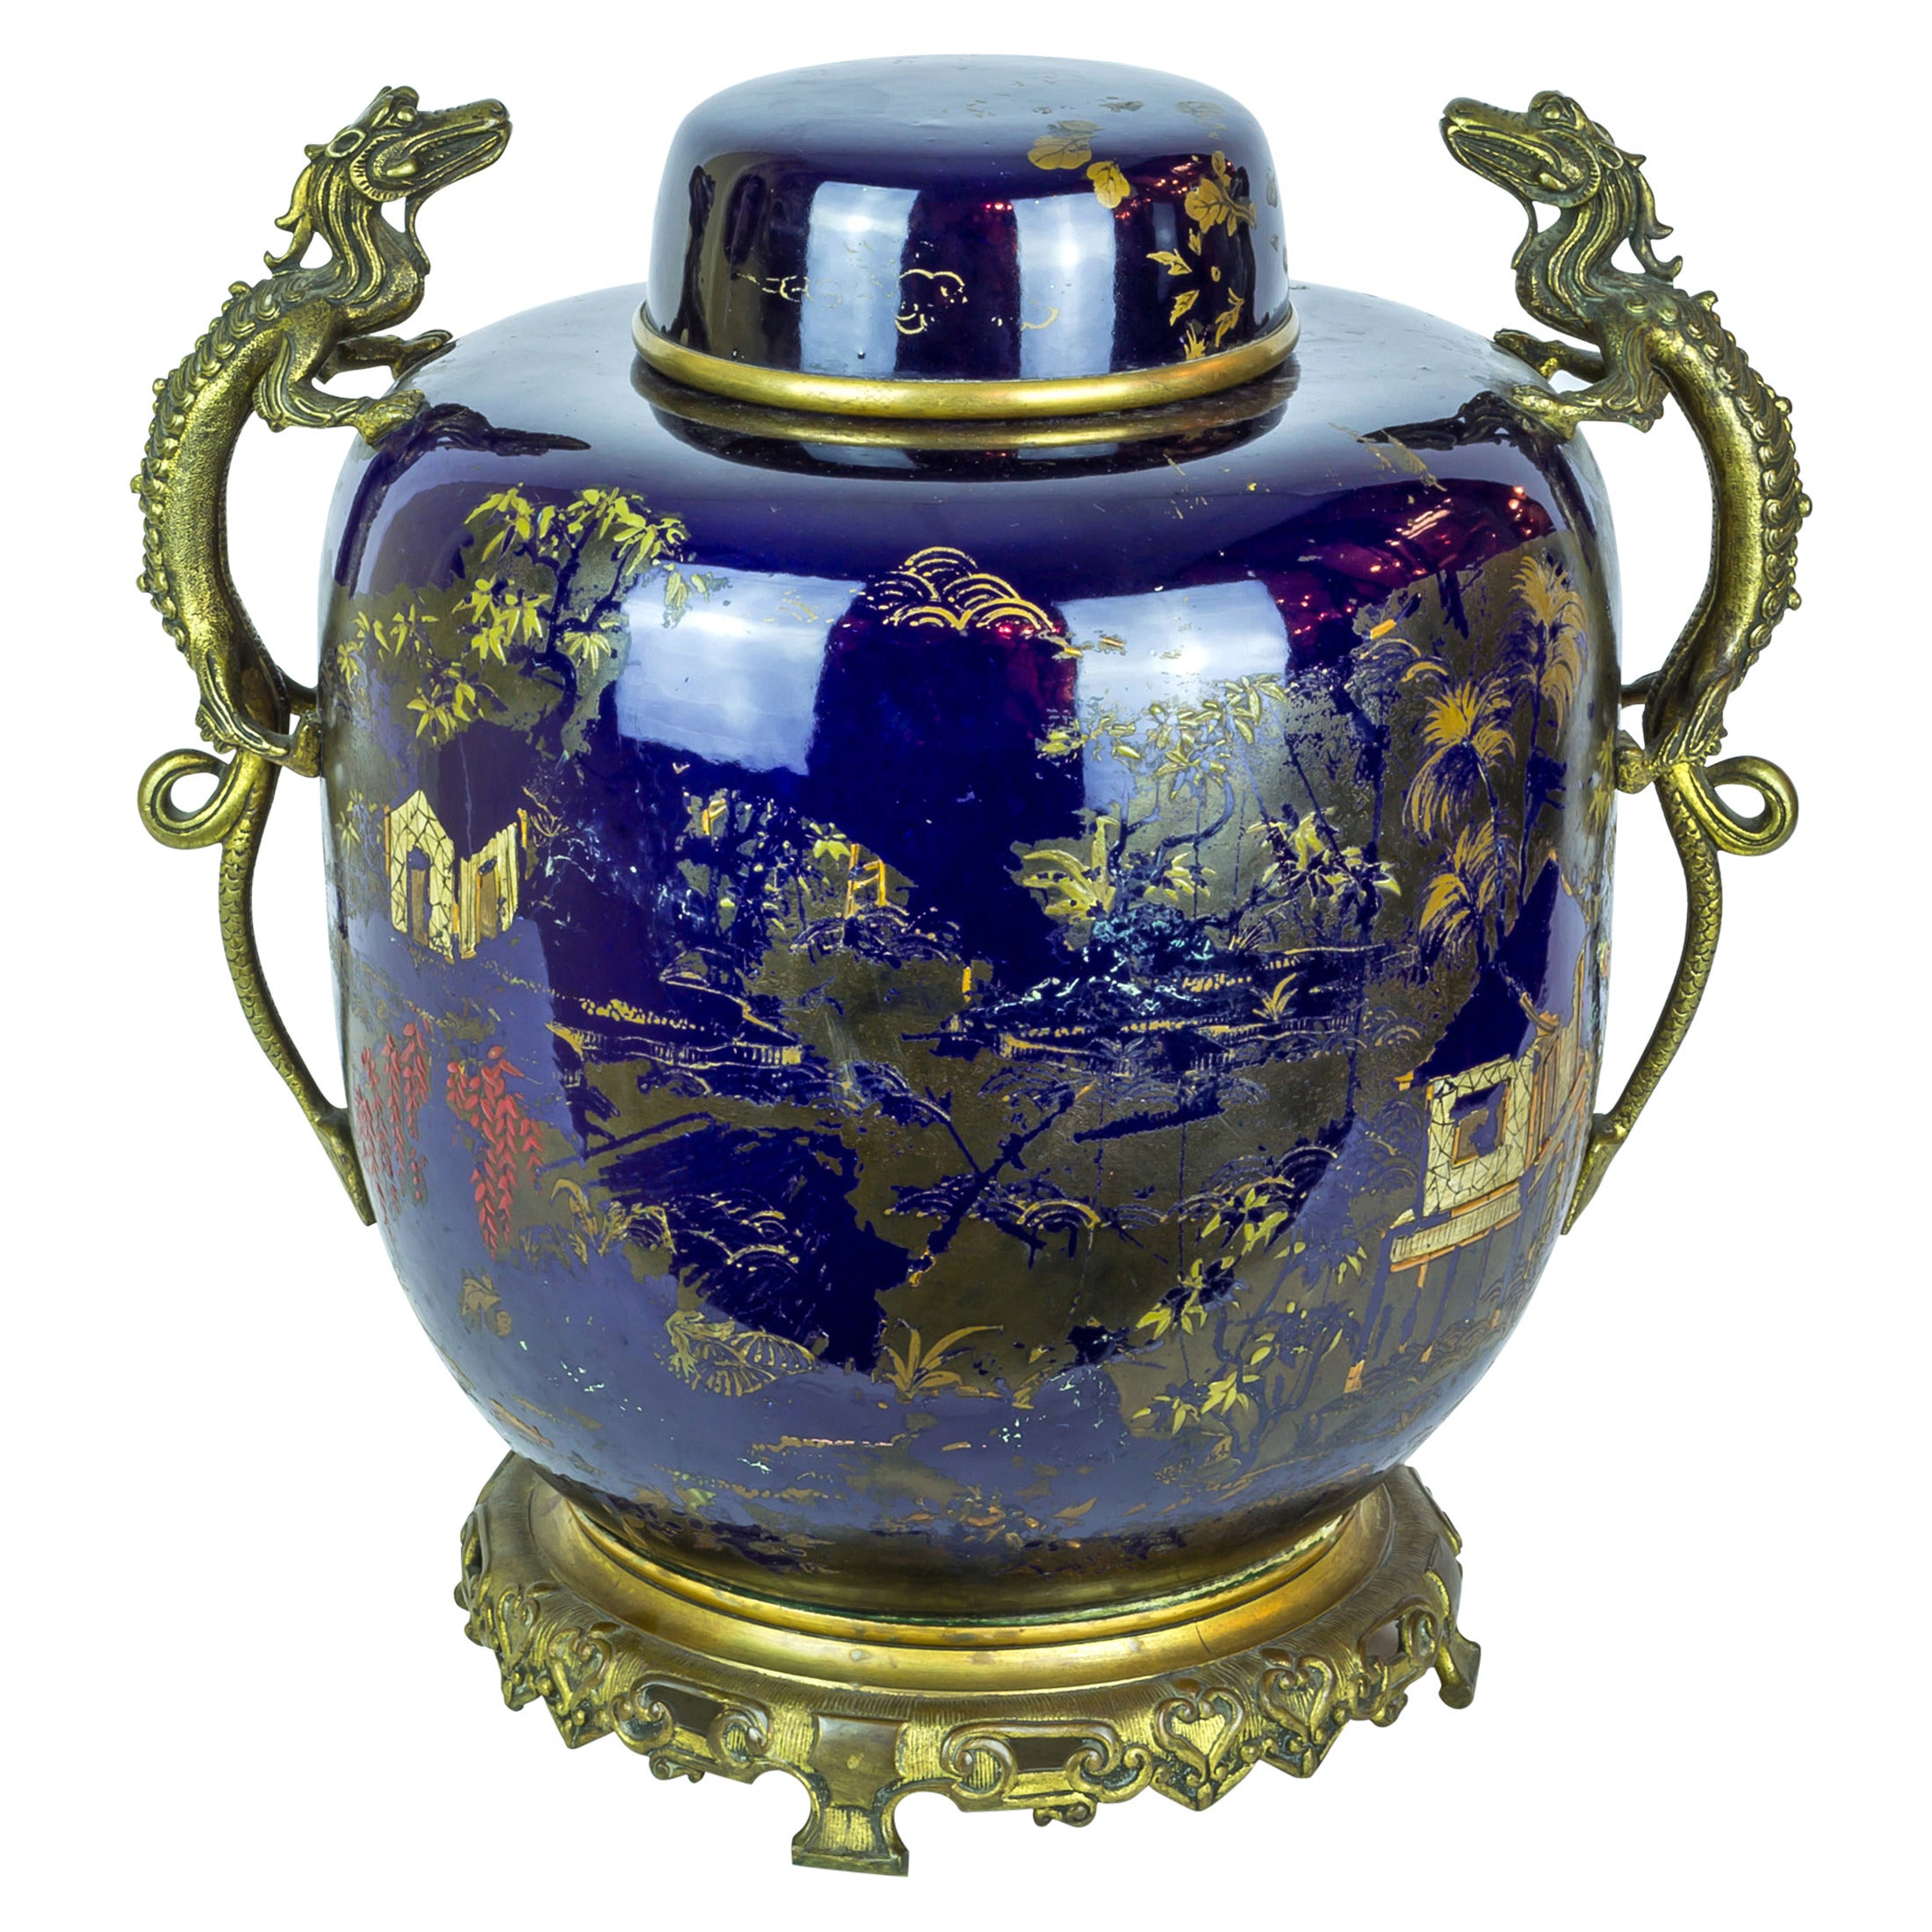 Oriental Porcelain Covered Jar with French Bronze Mounted Dragon Handles